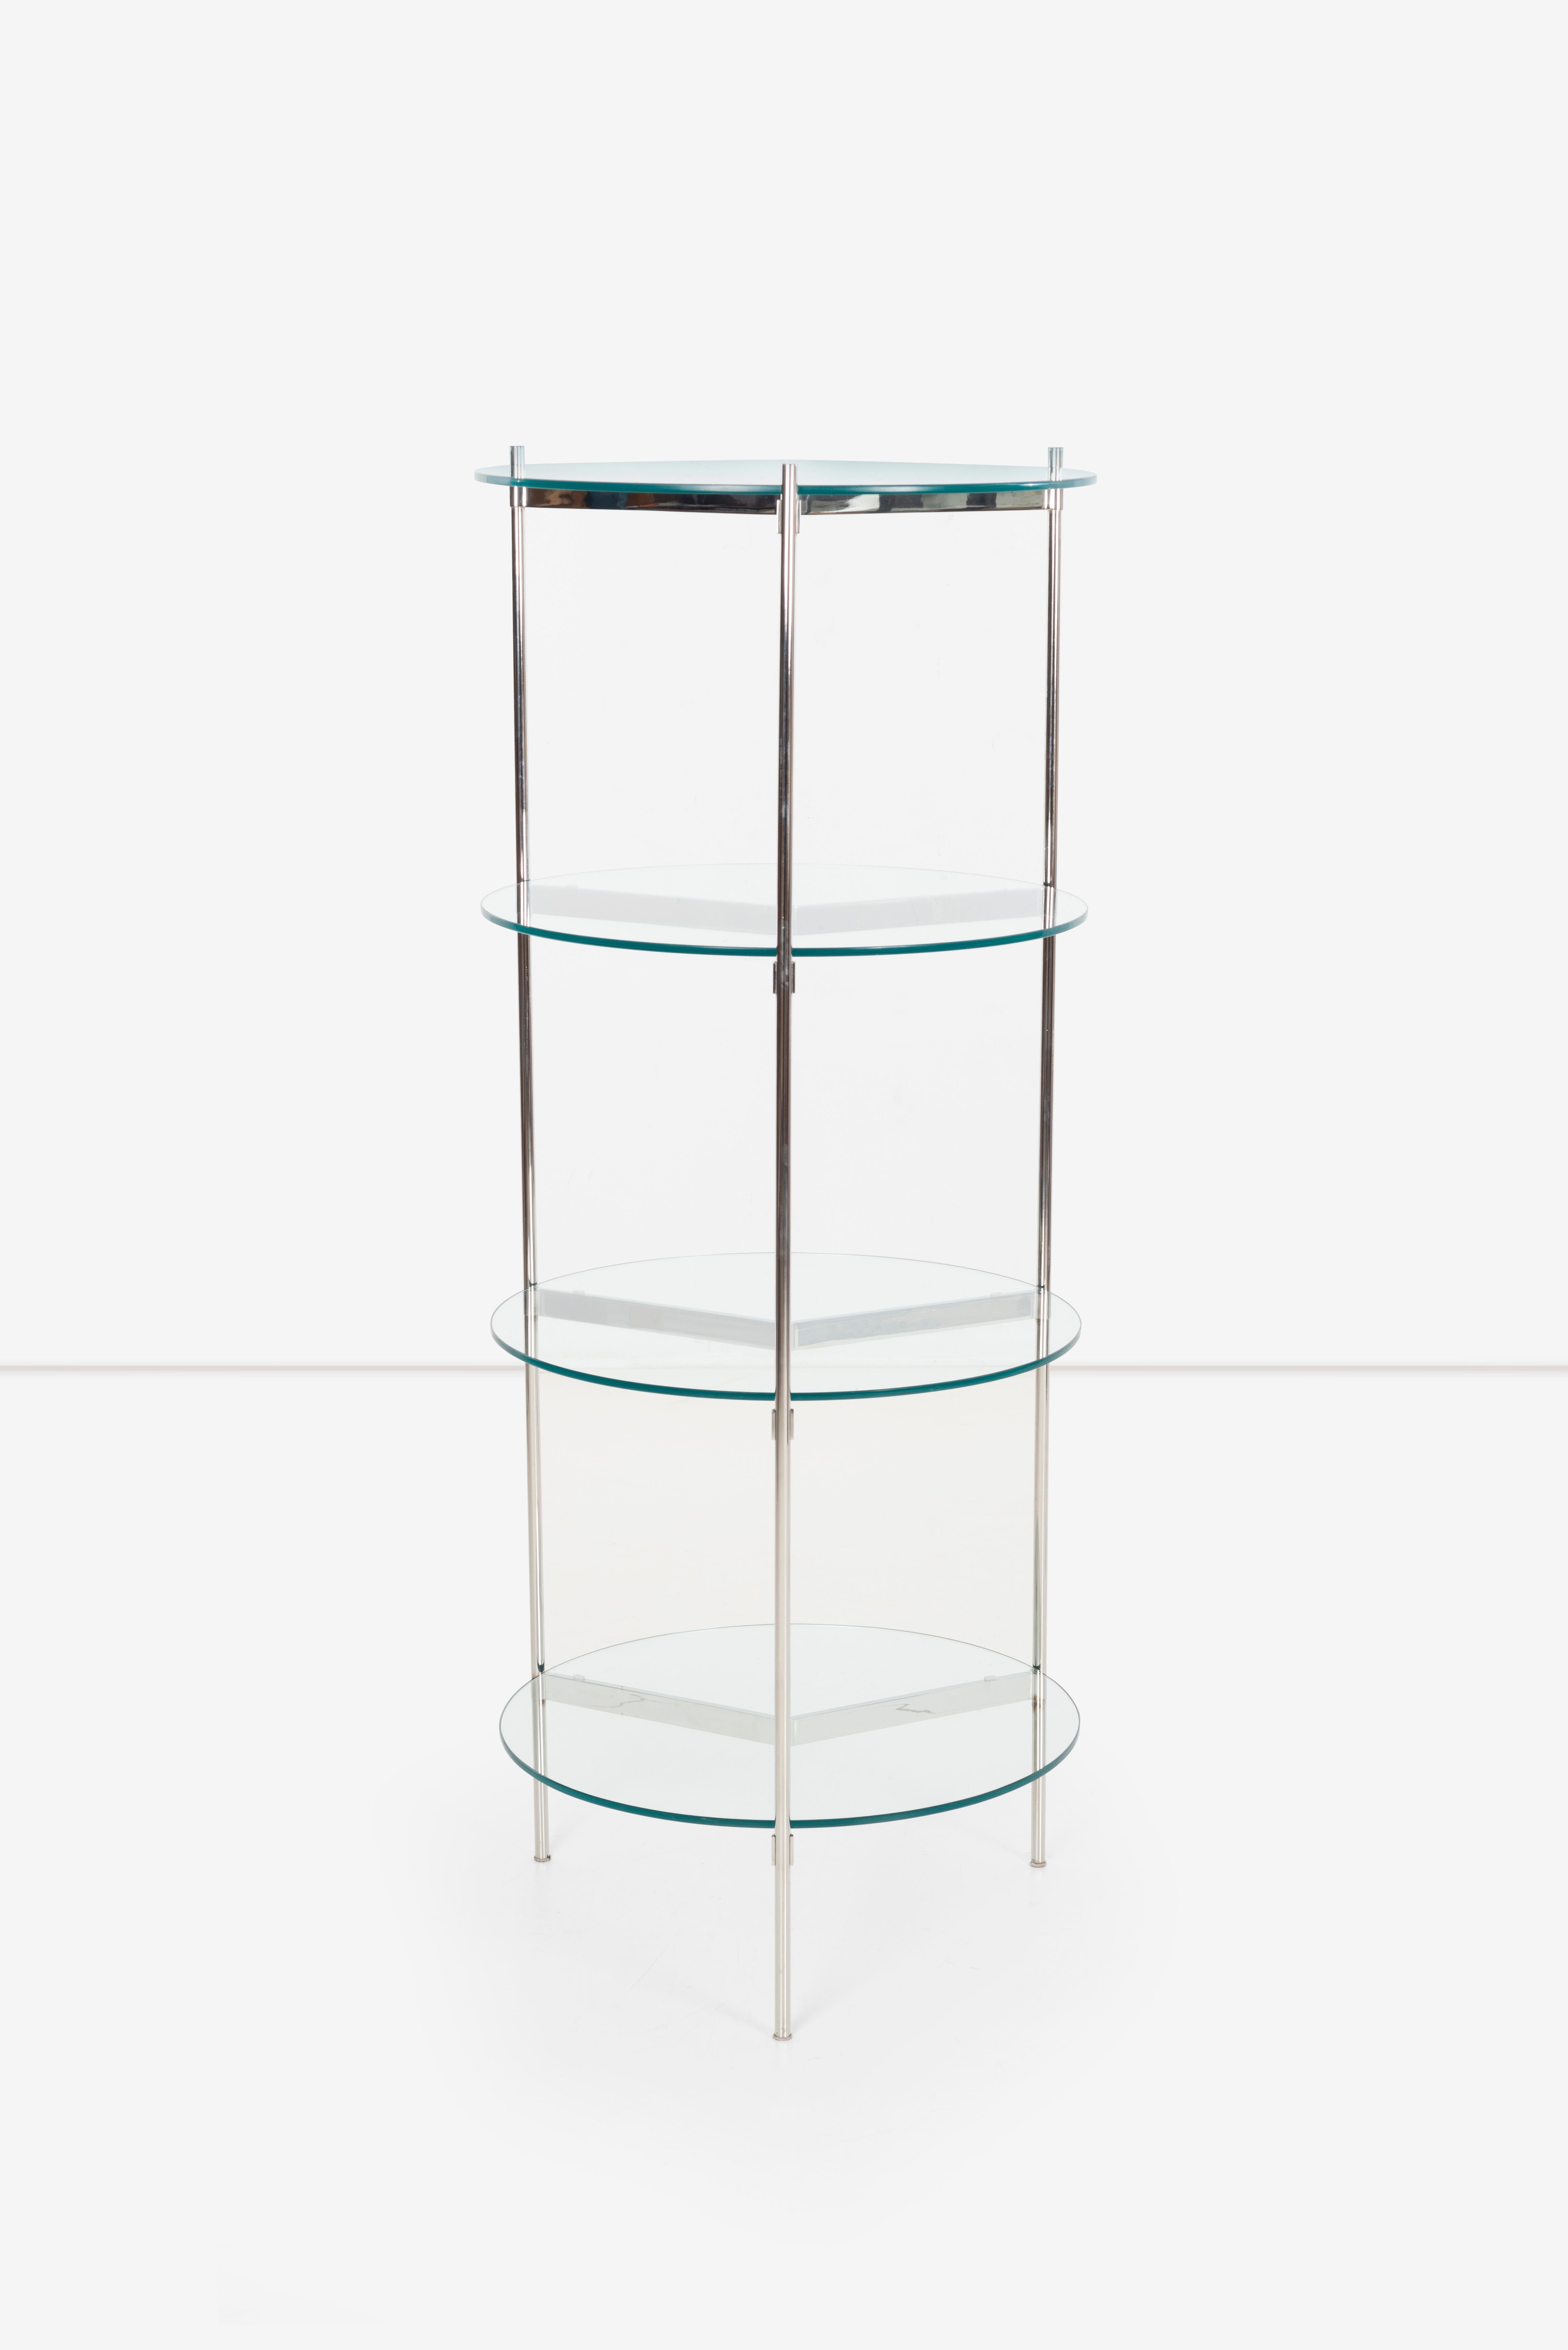 This etagere designed by Ward Bennett is a stunning piece of furniture that perfectly embodies the designer's minimalist aesthetic. This etagere features a cylindrical shape, which is both unique and visually striking. The chrome plated finish adds